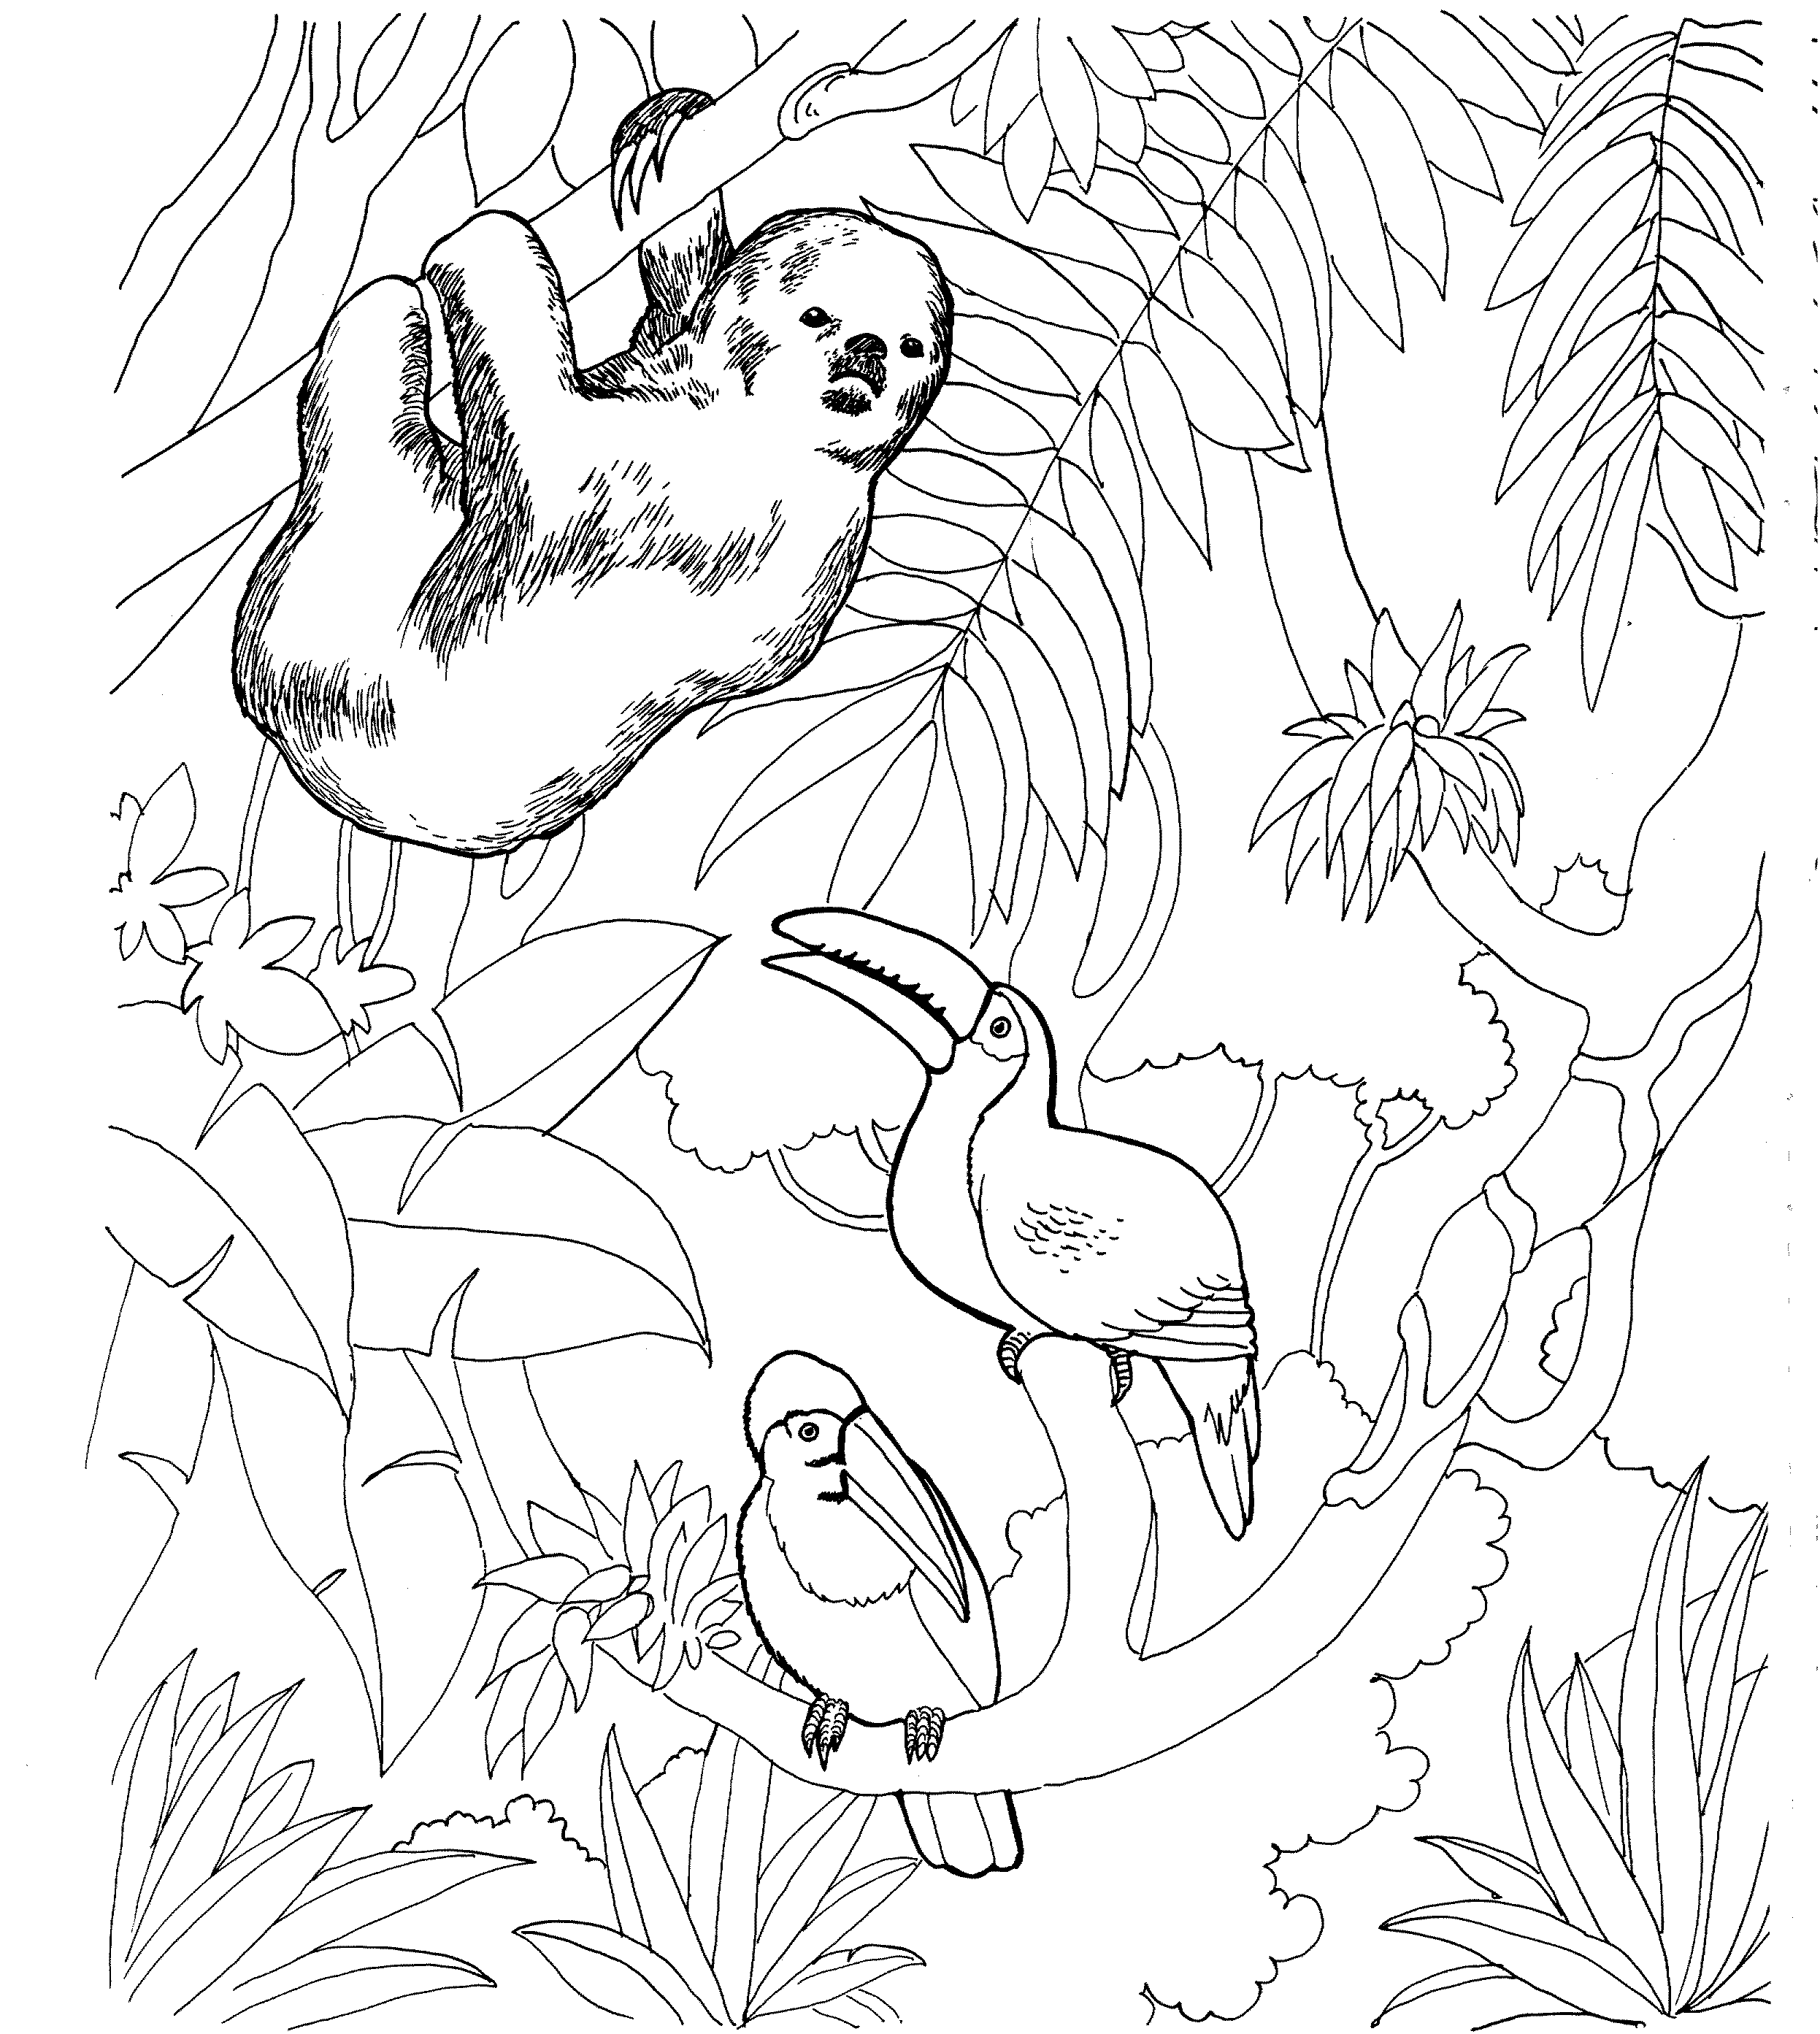 sloth coloring pages sloth coloring page with images free coloring pages pages coloring sloth 